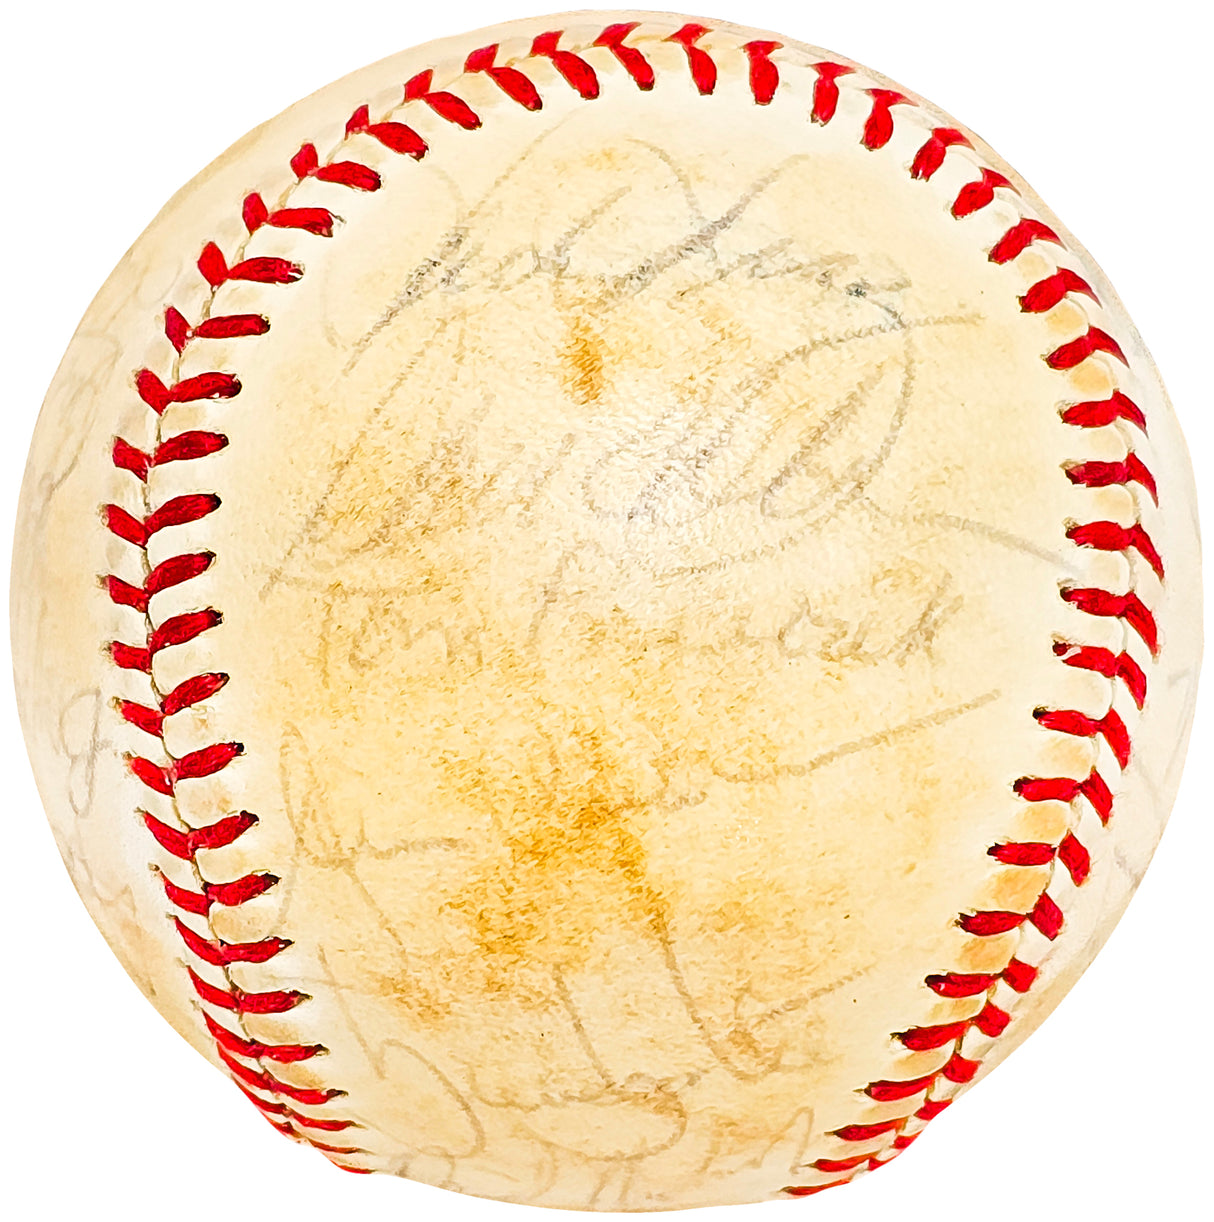 1981 Seattle Mariners Team Signed Autographed Baseball With 23 Signatures SKU #218503